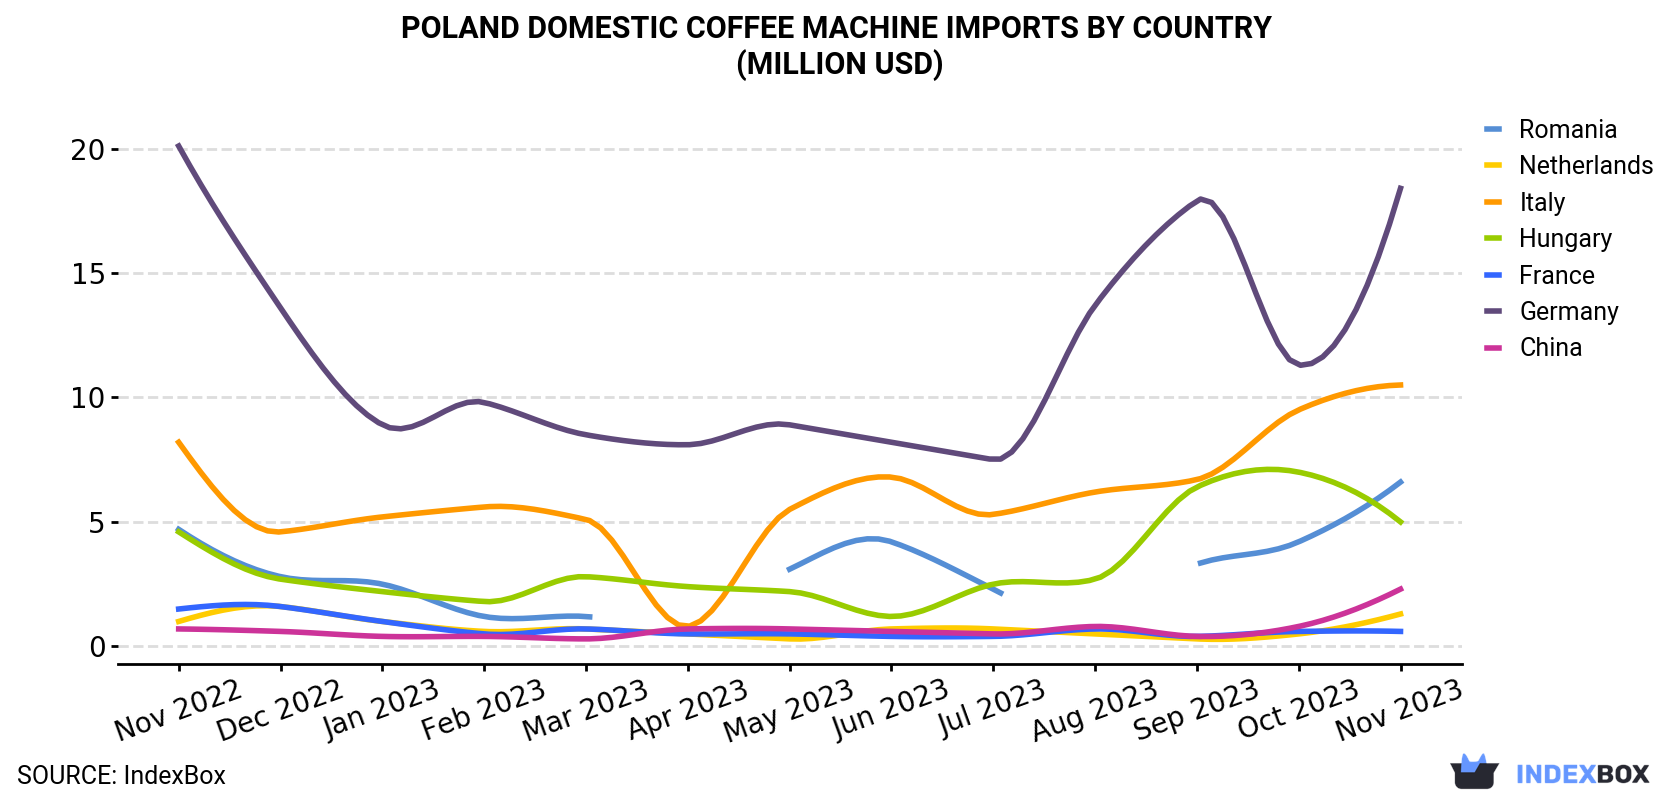 Poland Domestic Coffee Machine Imports By Country (Million USD)